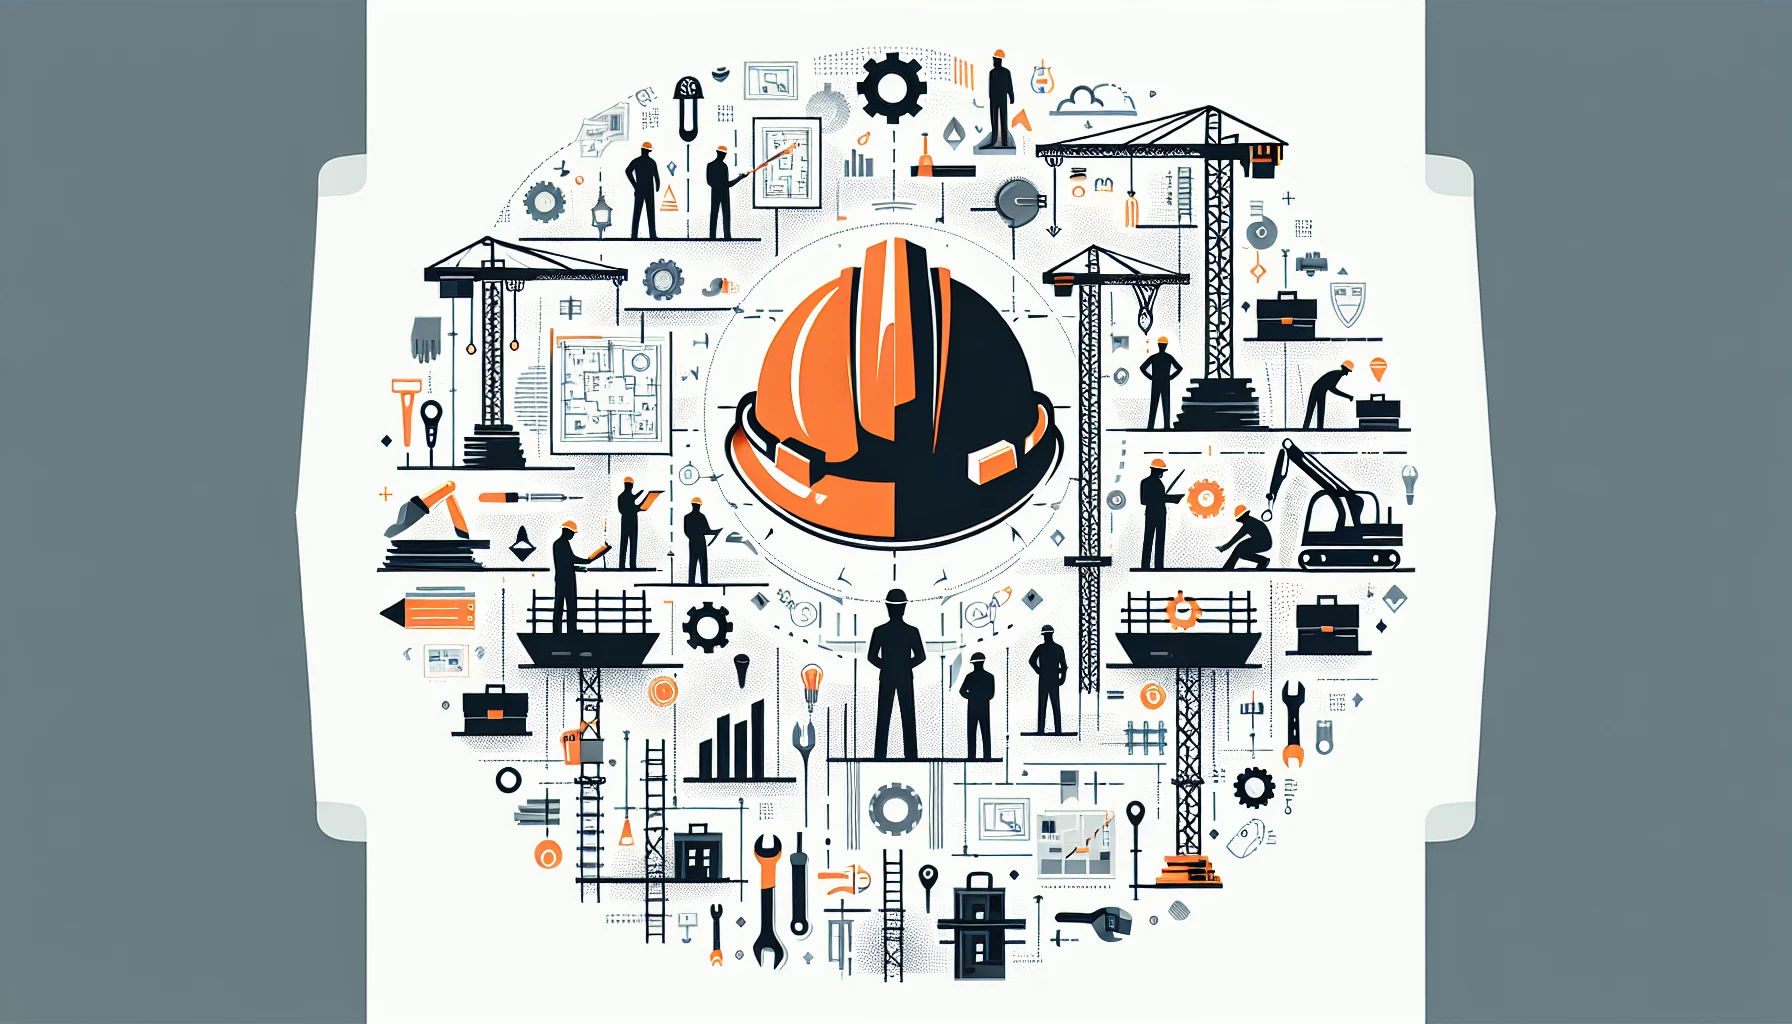 Building and construction management illustration with workers and tools